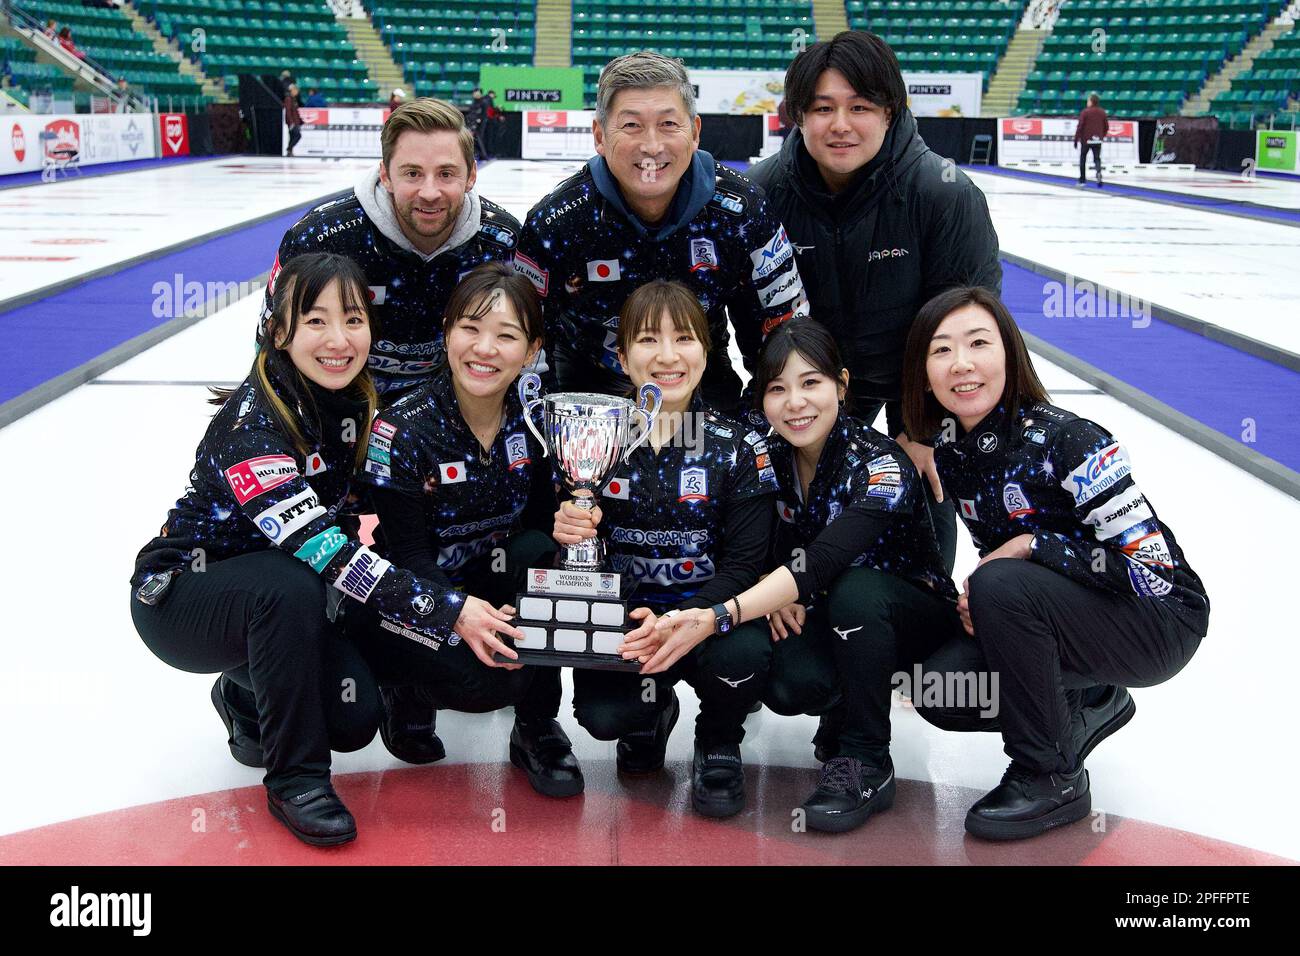 Team Fujisawa pose with the trophy after their victory in the final of the Grand Slam of Curling